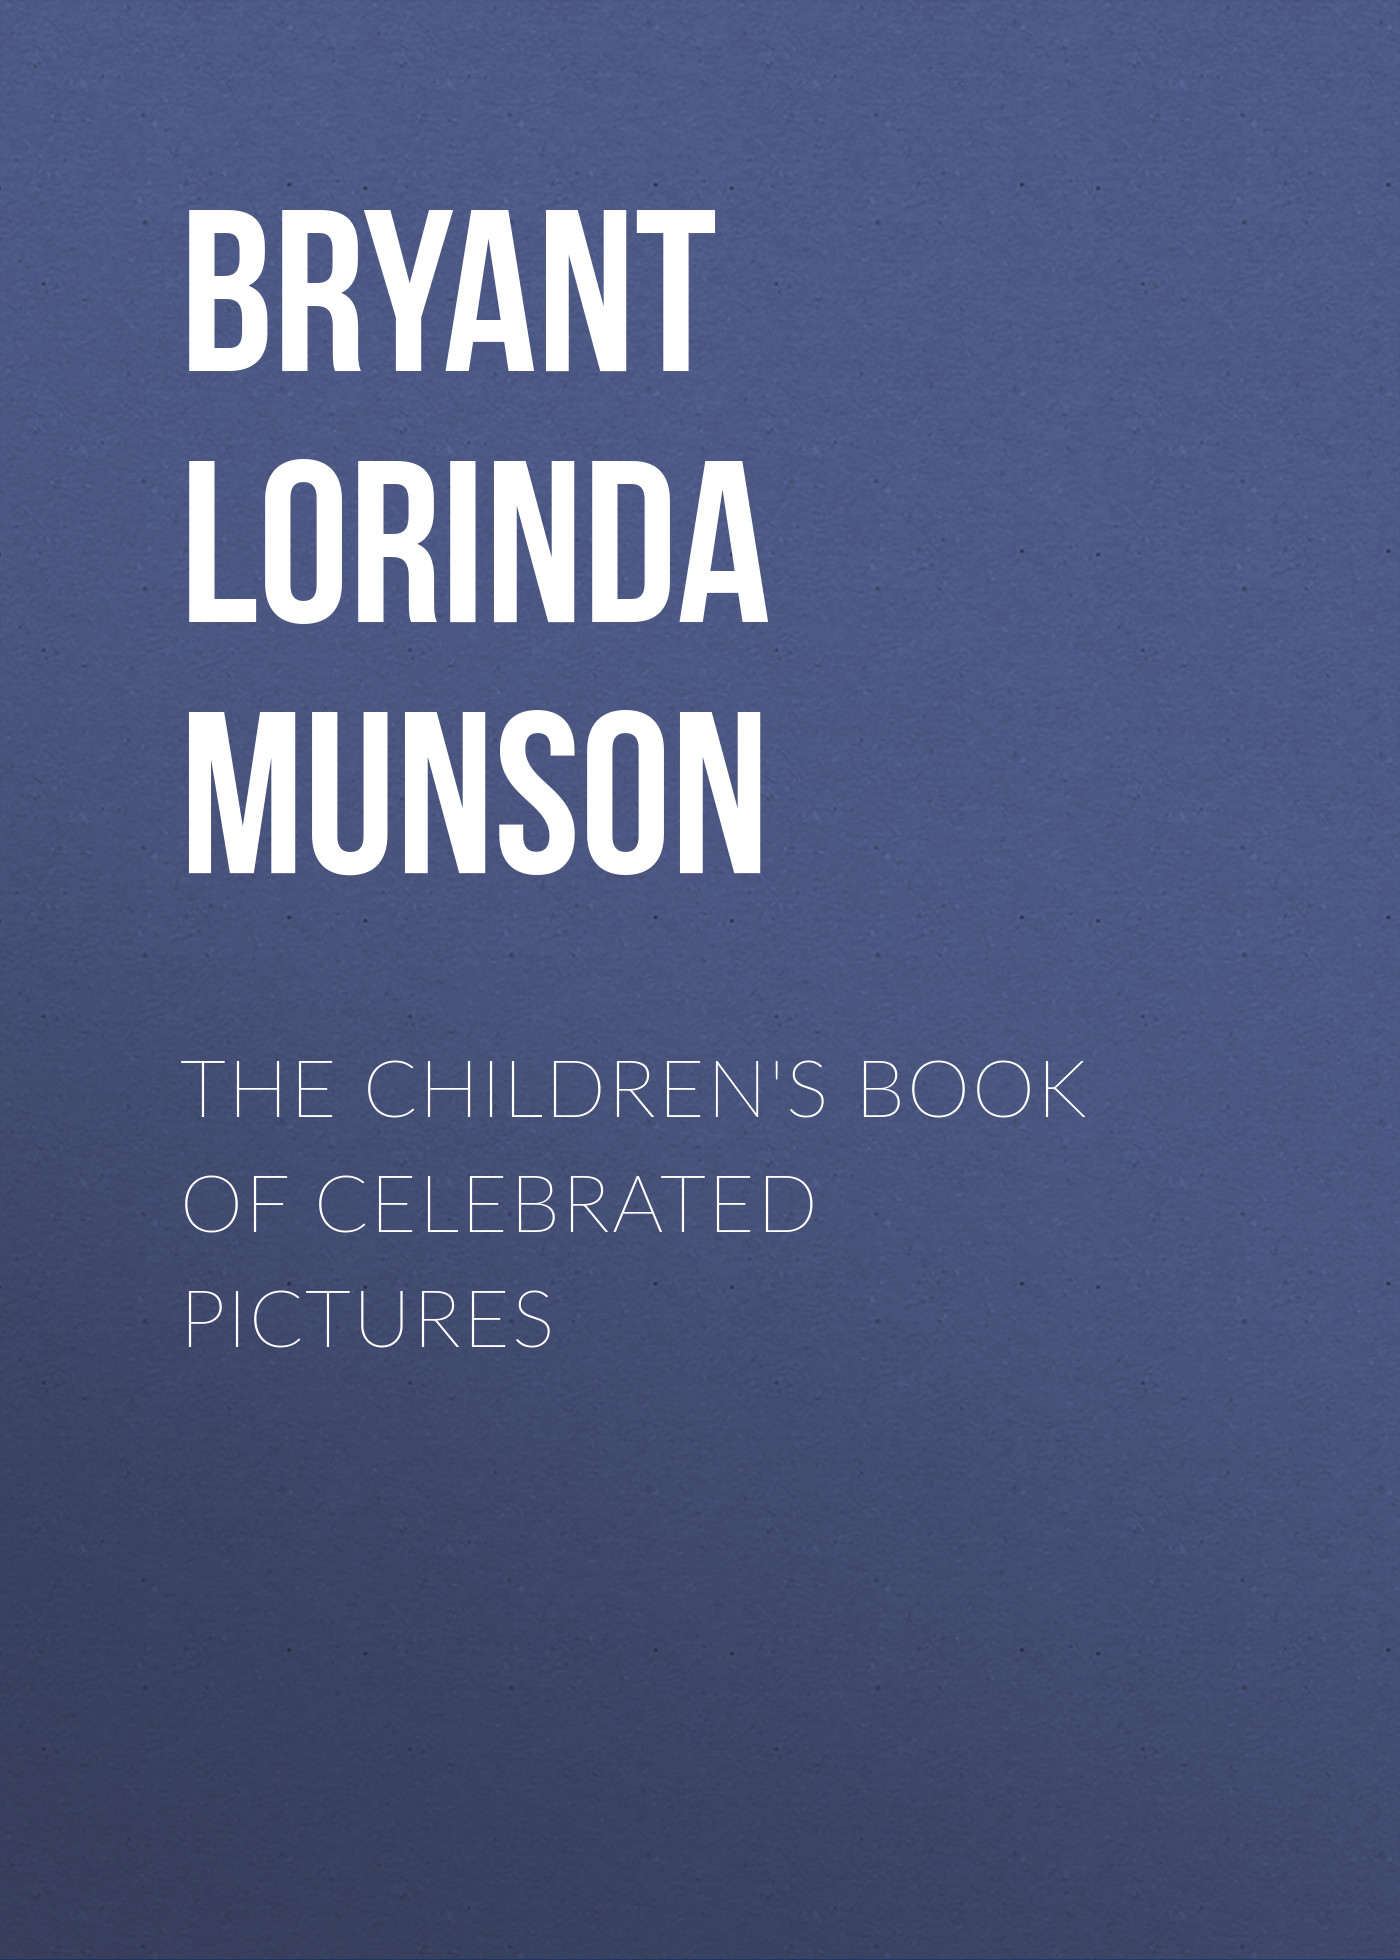 The Children's Book of Celebrated Pictures